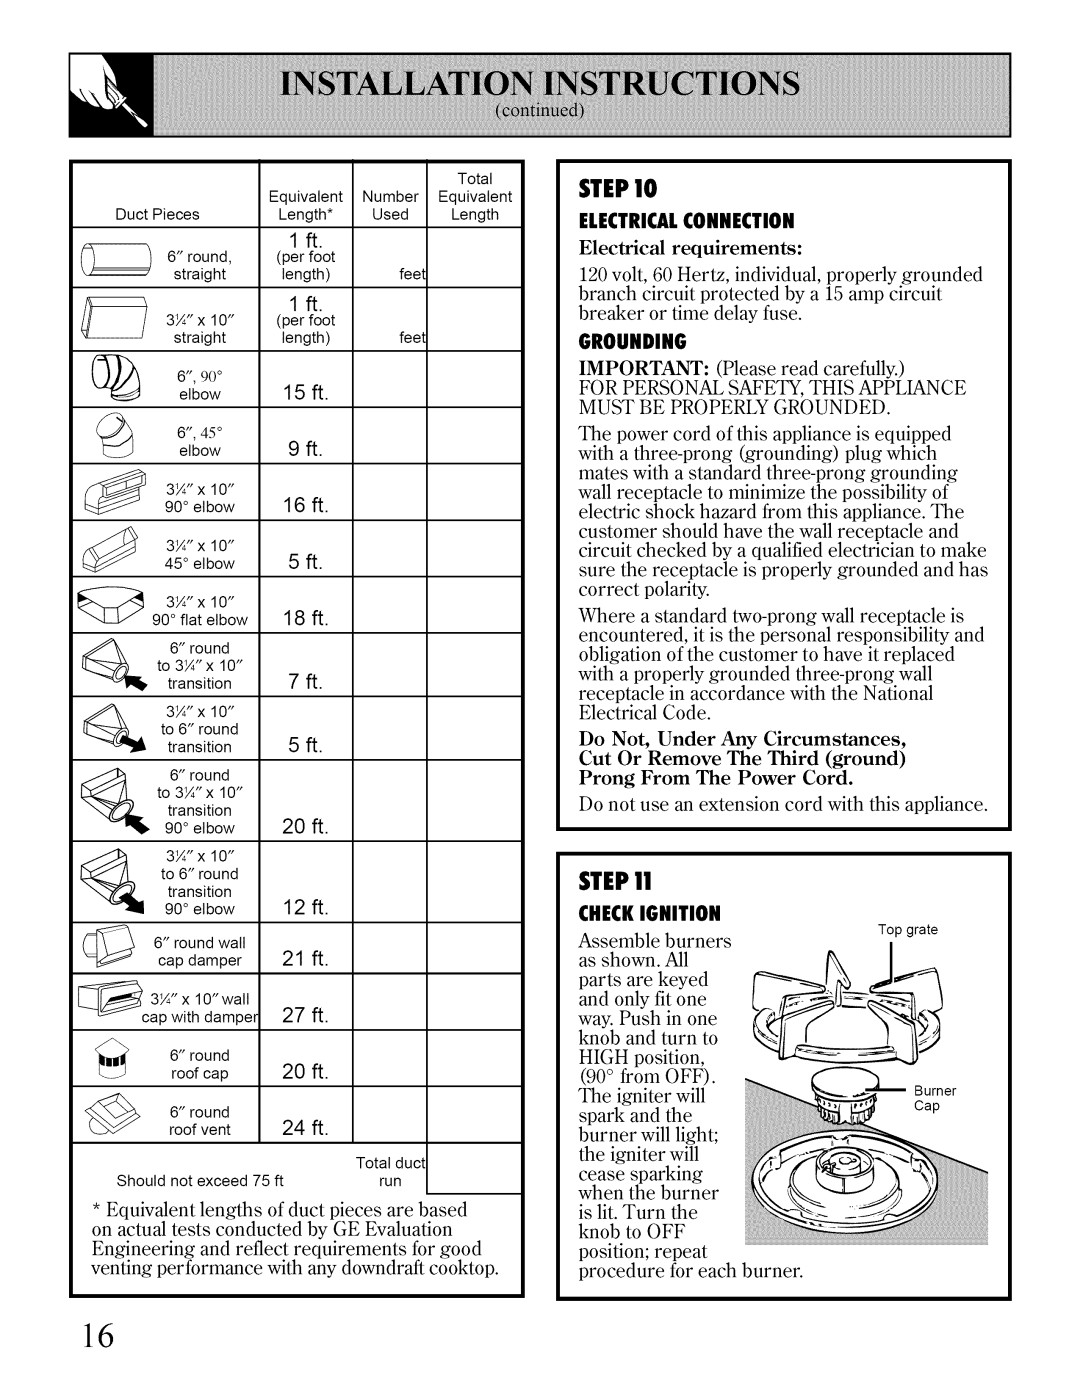 Bosch Appliances JGP641, JGP640 installation instructions STEP!0, Step, Electricalconnection, Grounding, Checkignition 